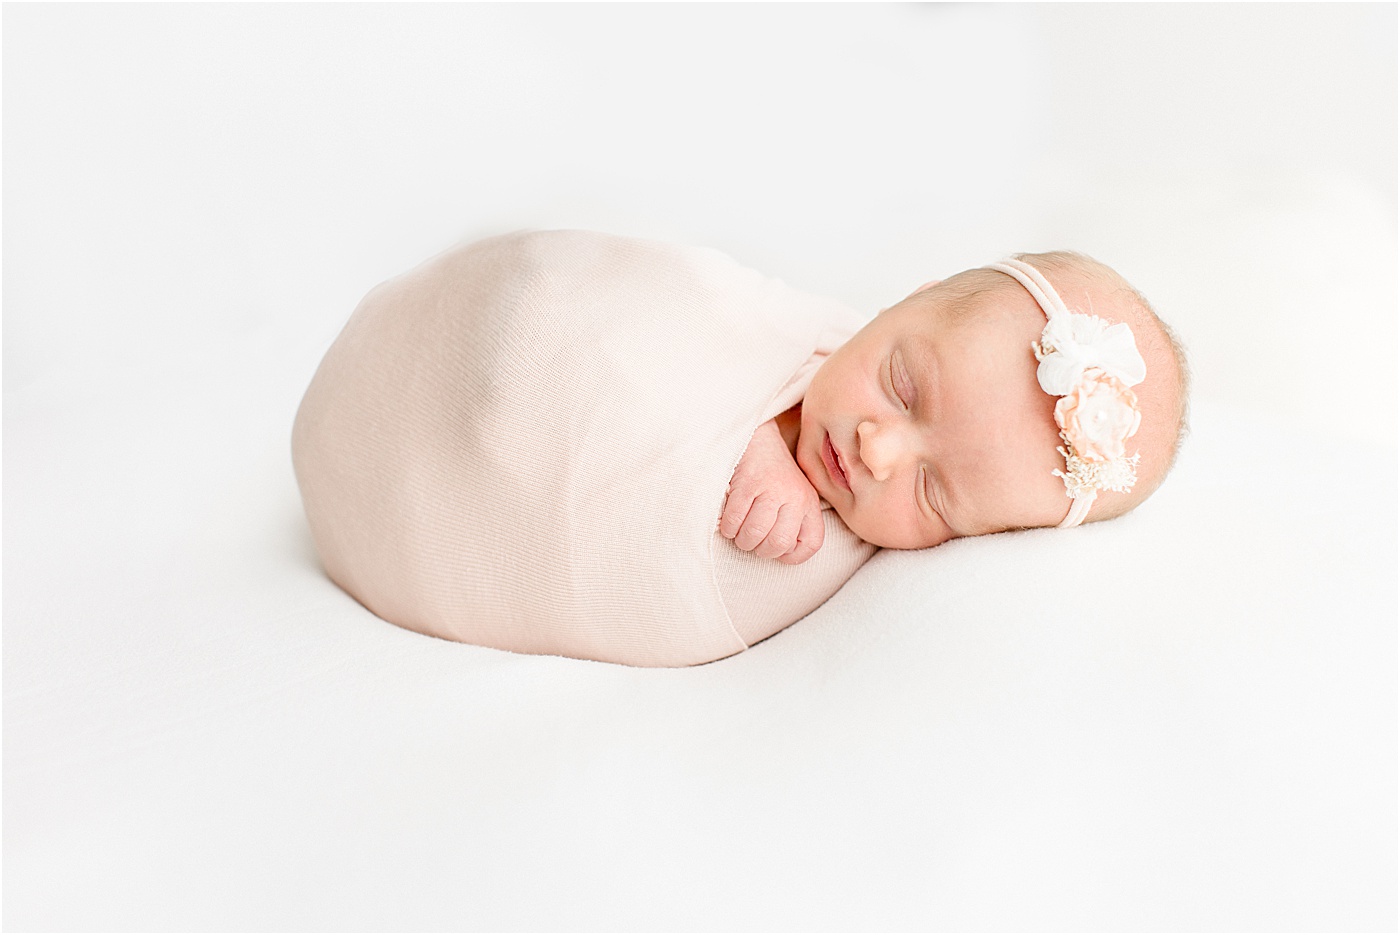 Sleeping baby in blush pink swaddle on white background. Photo by Sana Ahmed Photography.